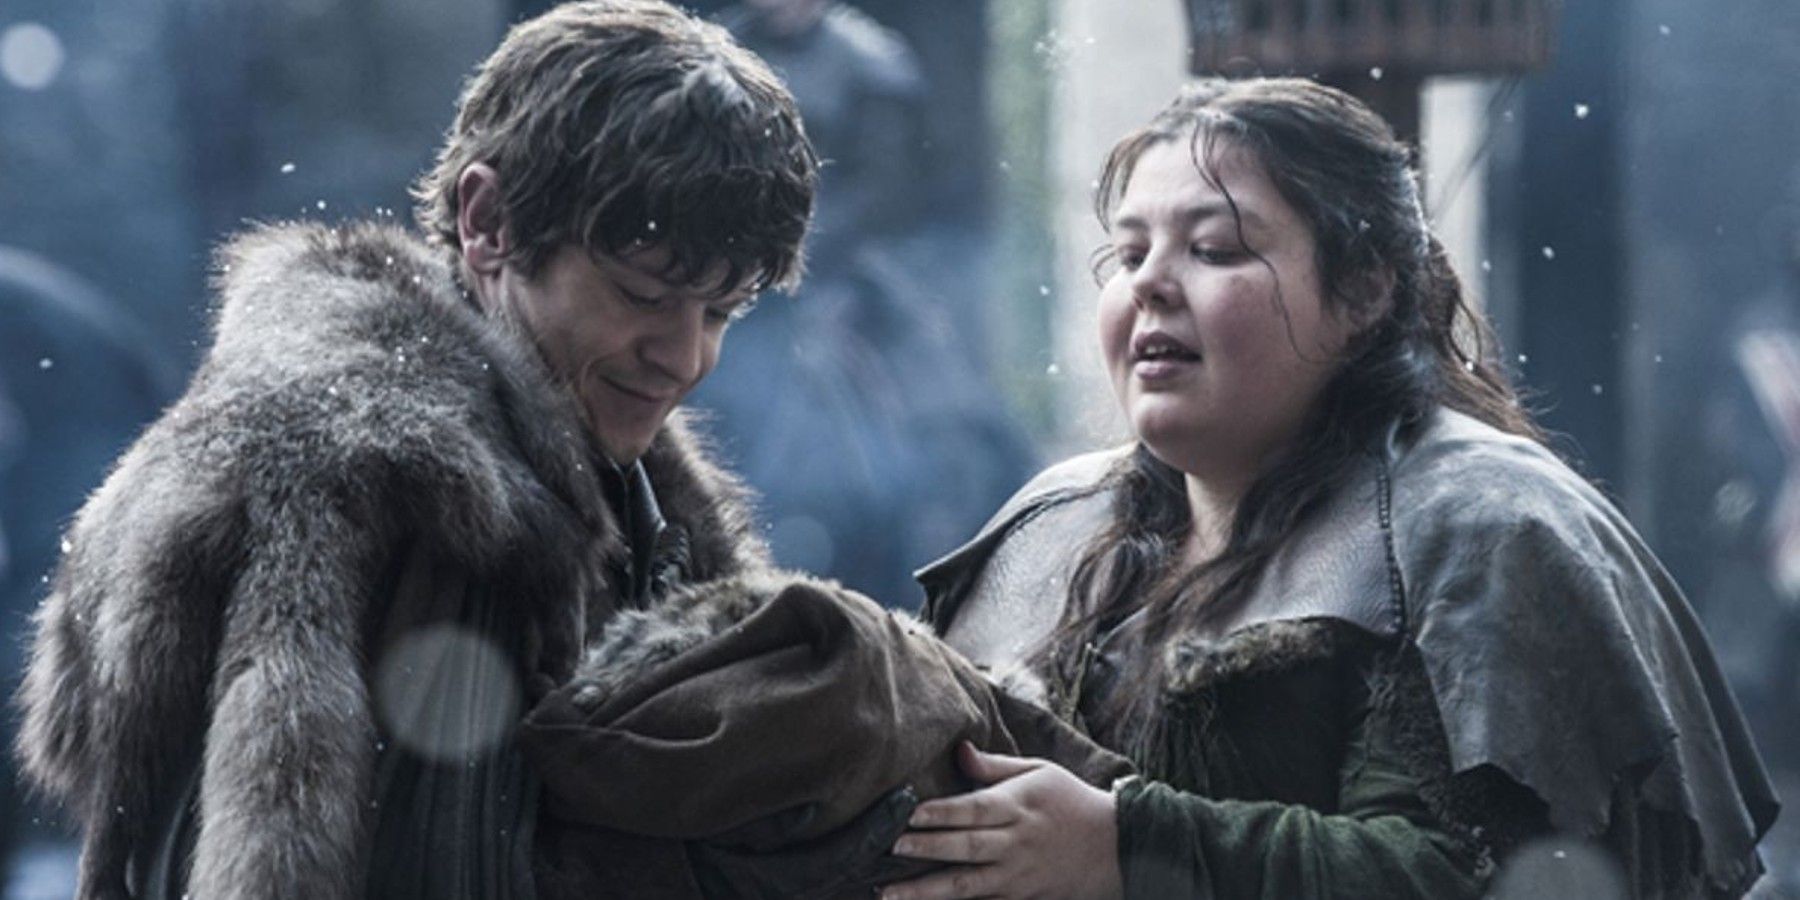 Ramsay with Walda Bolton in Game of Thrones